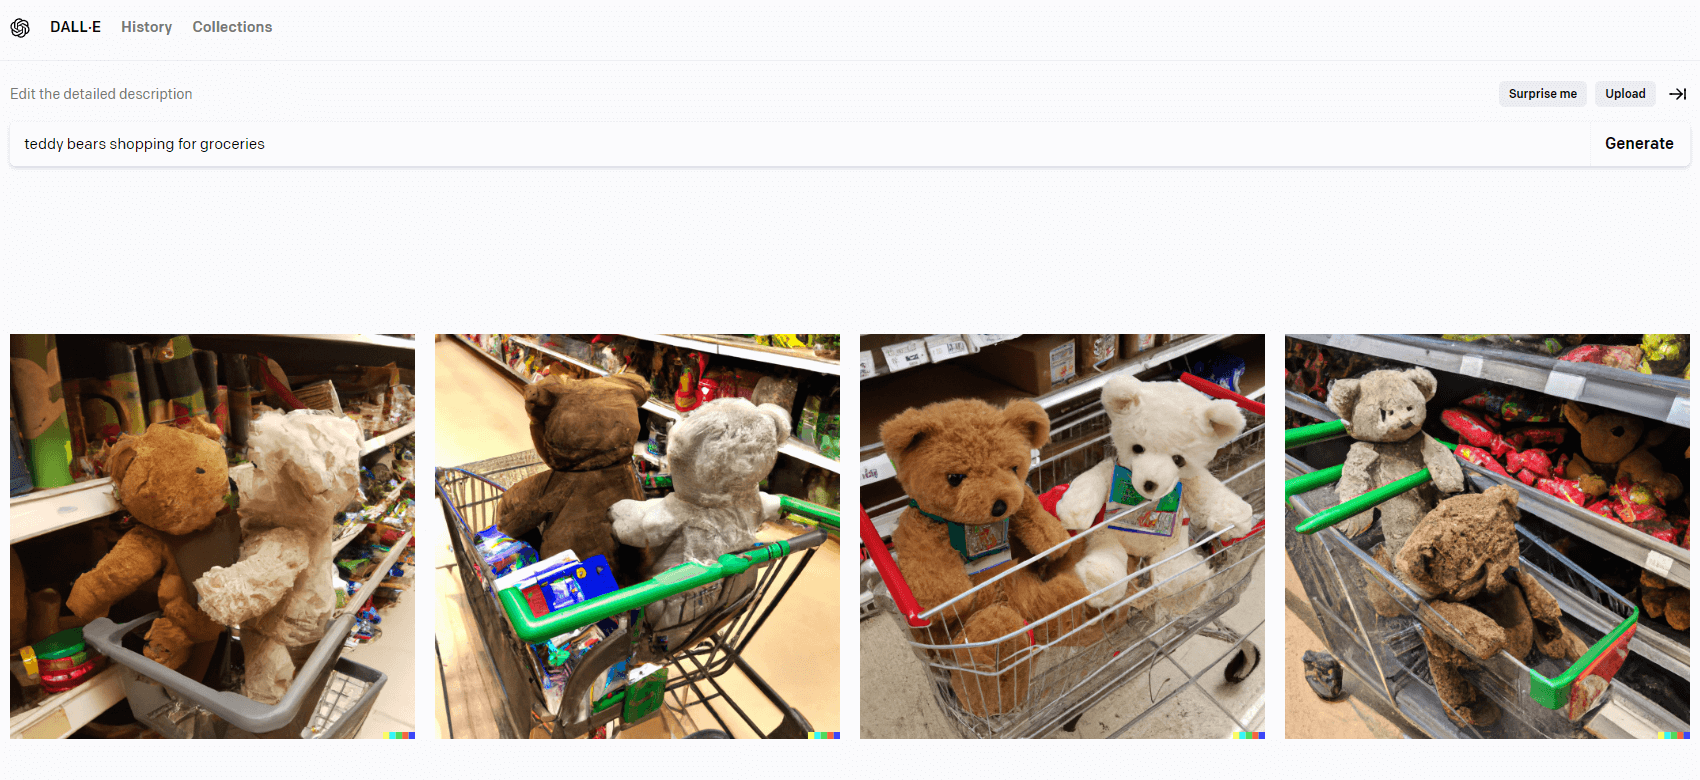 Creating ‘teddy bears shopping for groceries’ as an AI generated image